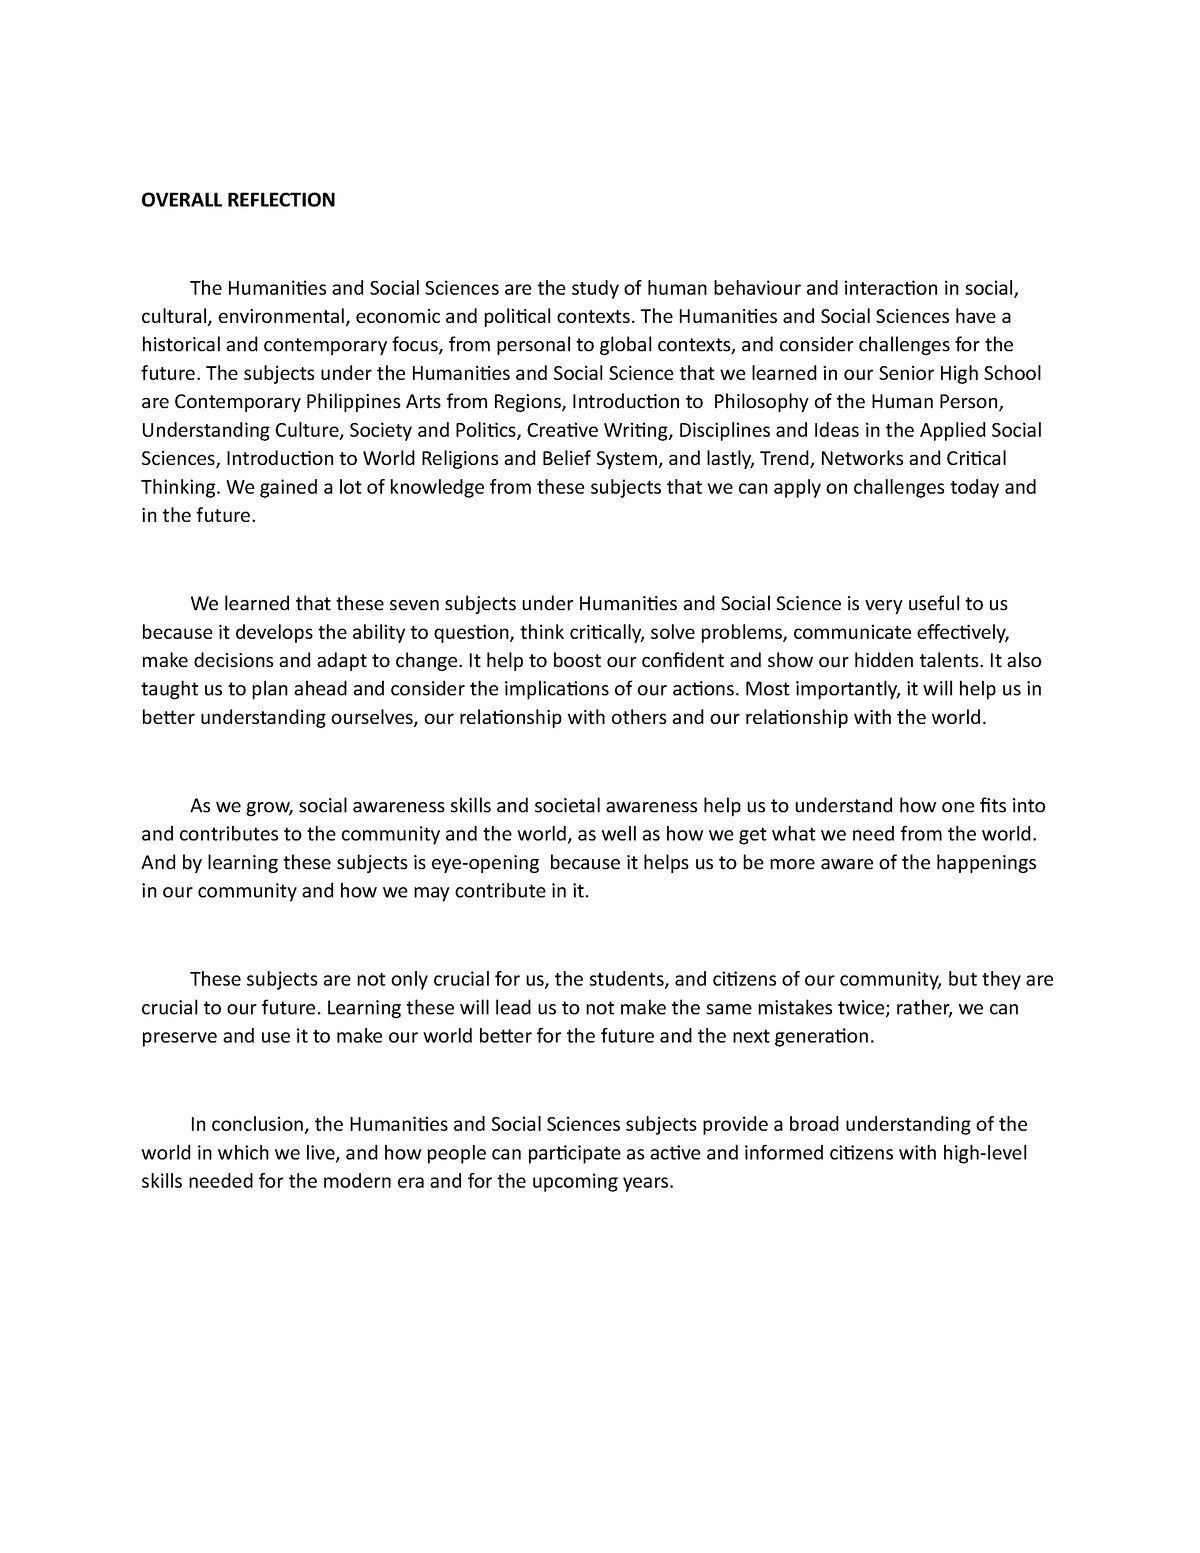 Reflection ( Concept Paper) - OVERALL REFLECTION The Humanities and ...